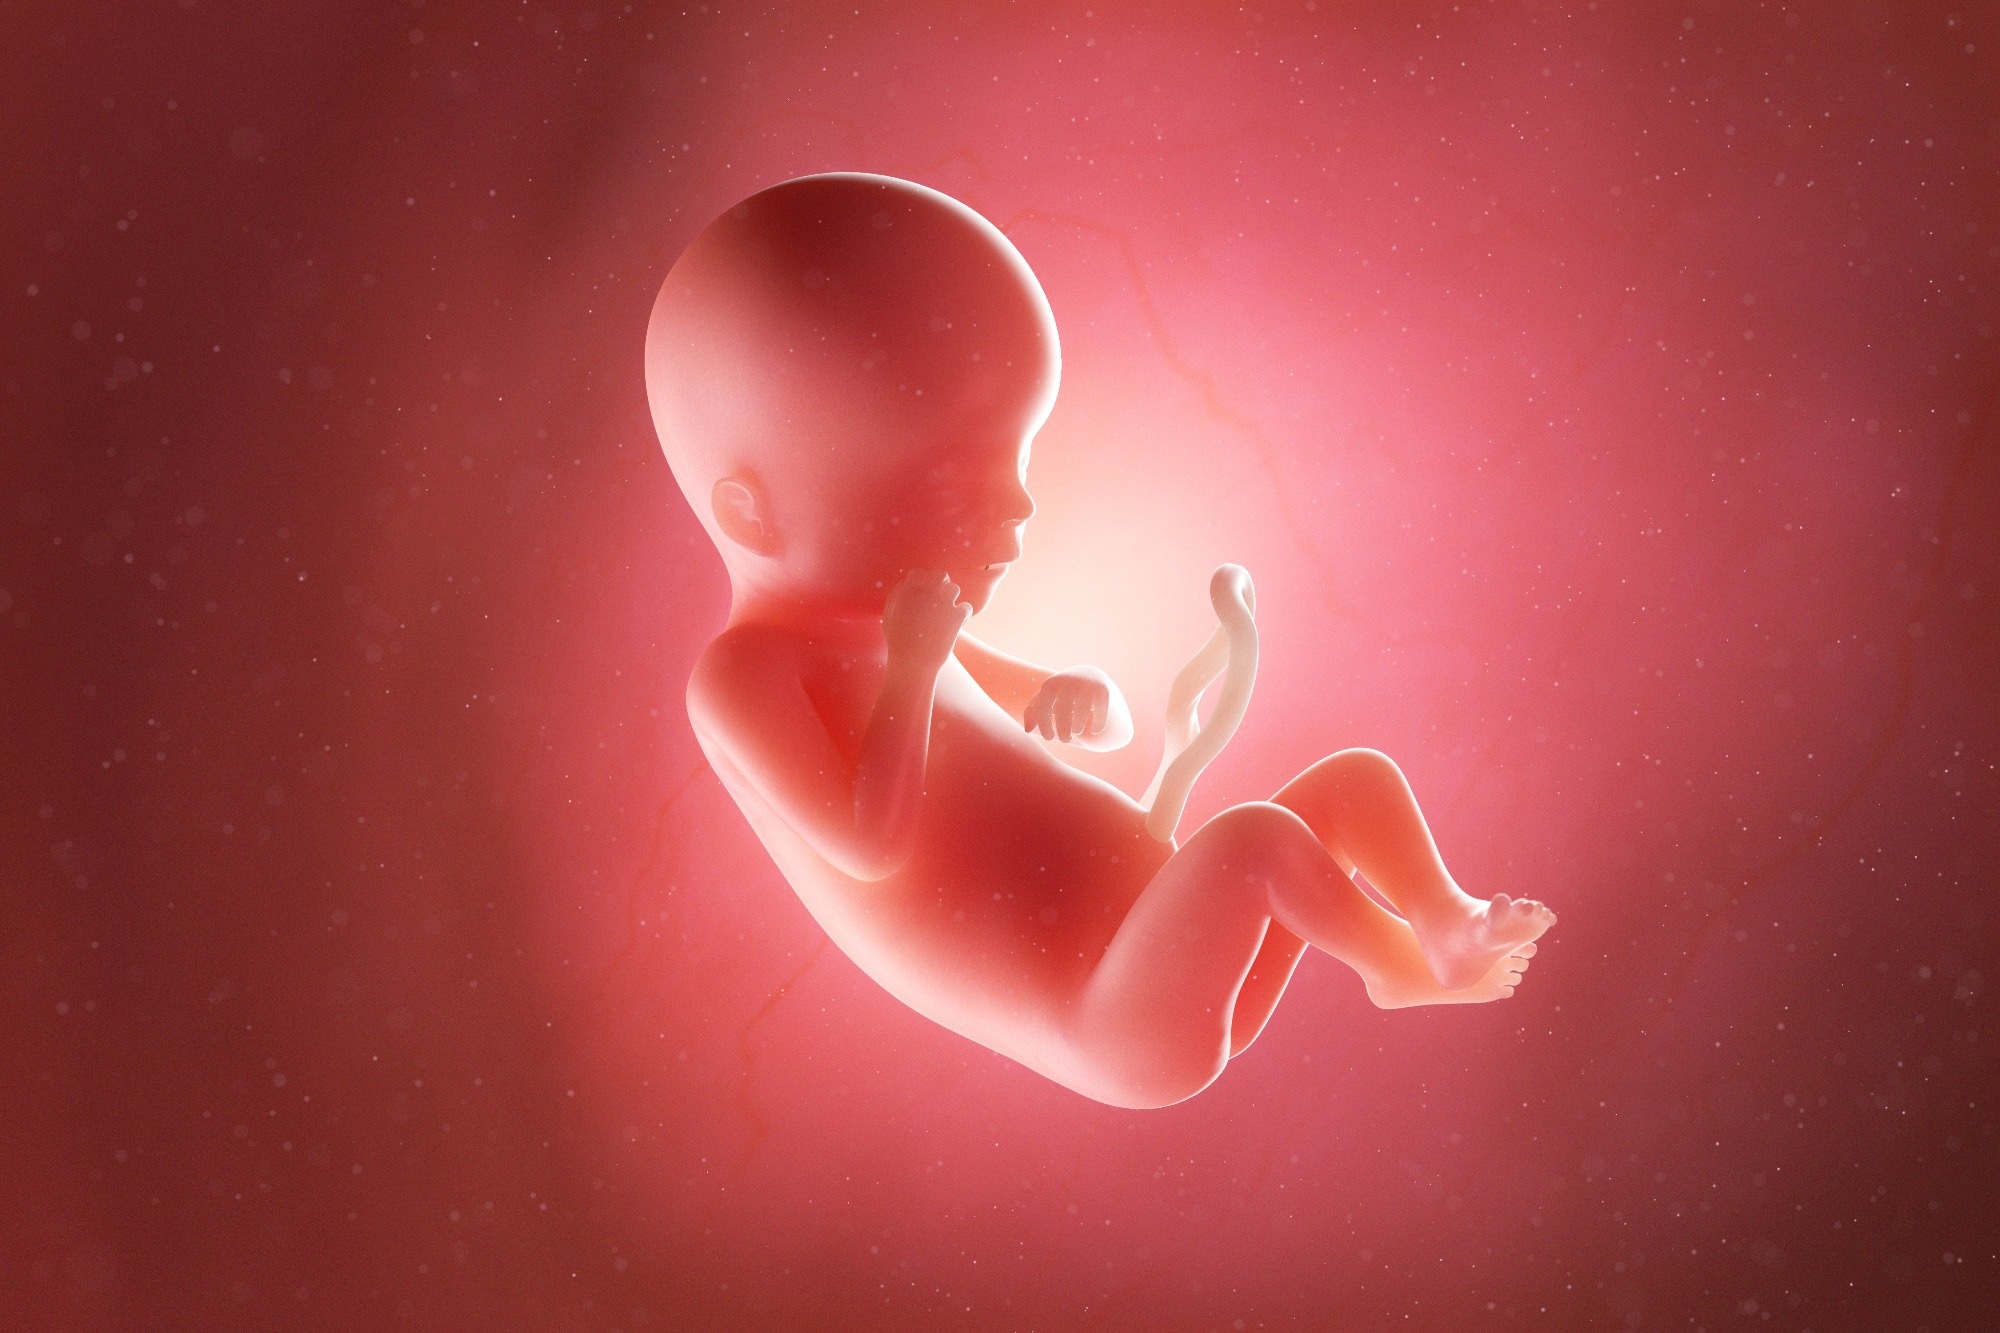 Study: Effects of mercury exposure on fetal body burden and its association with growth of infants. Image Credit: SciePro/Shutterstock